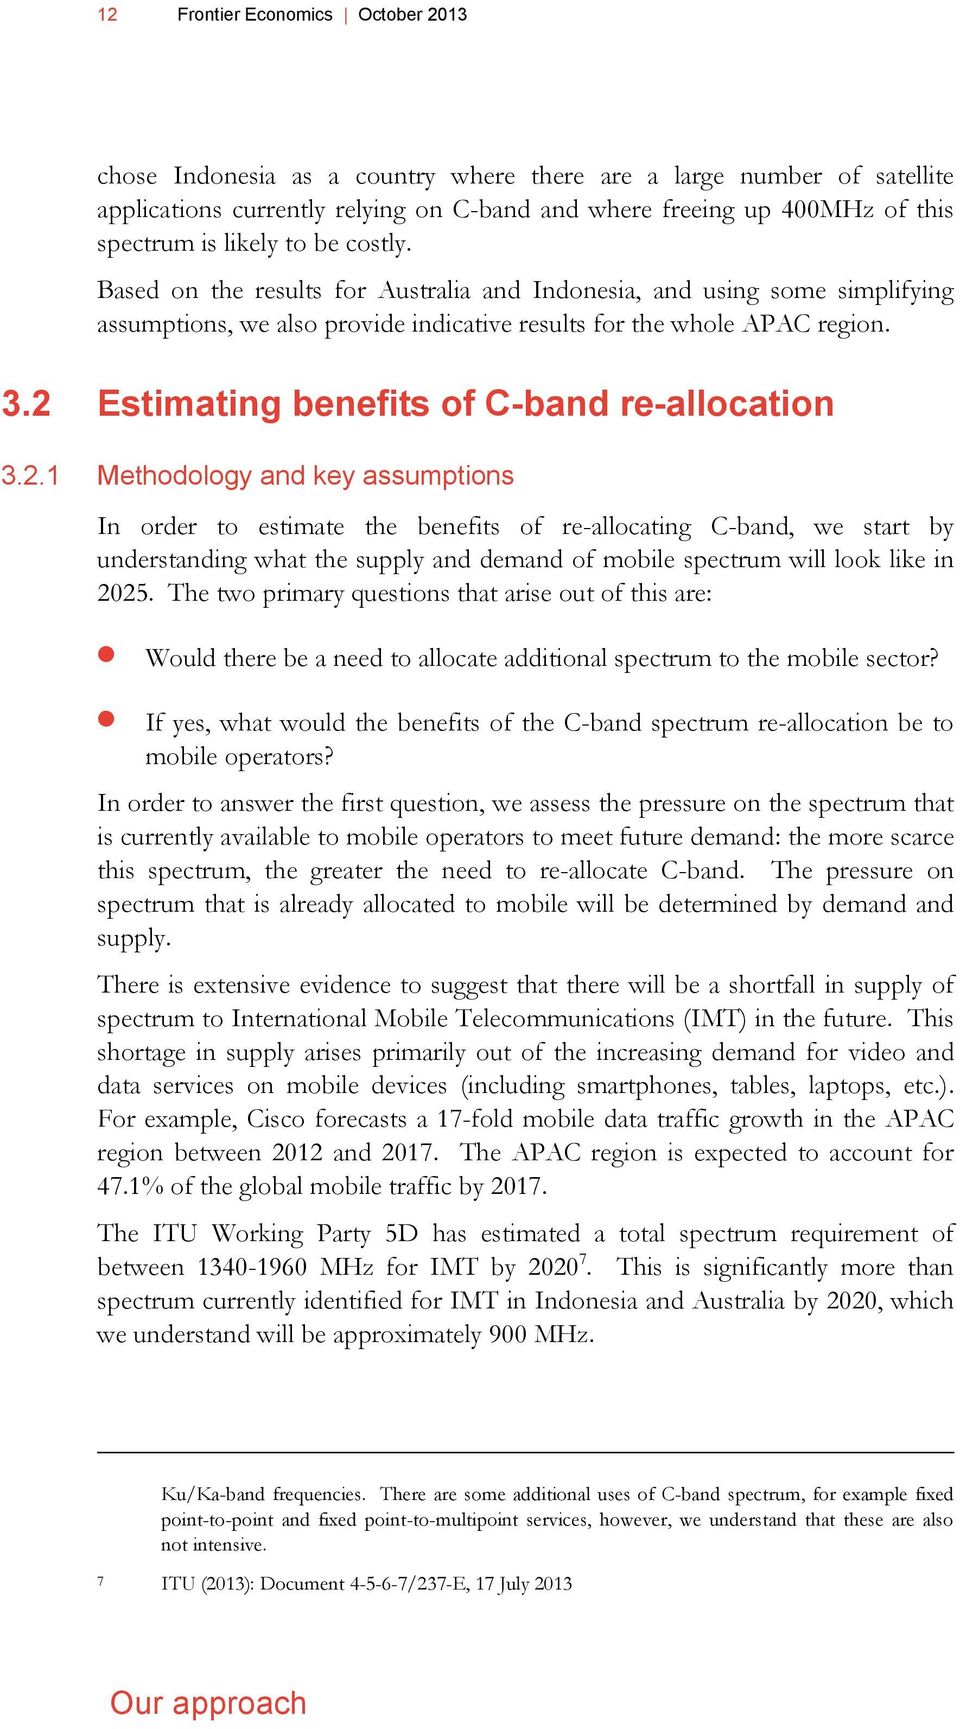 2 Estimating benefits of C-band re-allocation 3.2.1 Methodology and key assumptions In order to estimate the benefits of re-allocating C-band, we start by understanding what the supply and demand of mobile spectrum will look like in 2025.